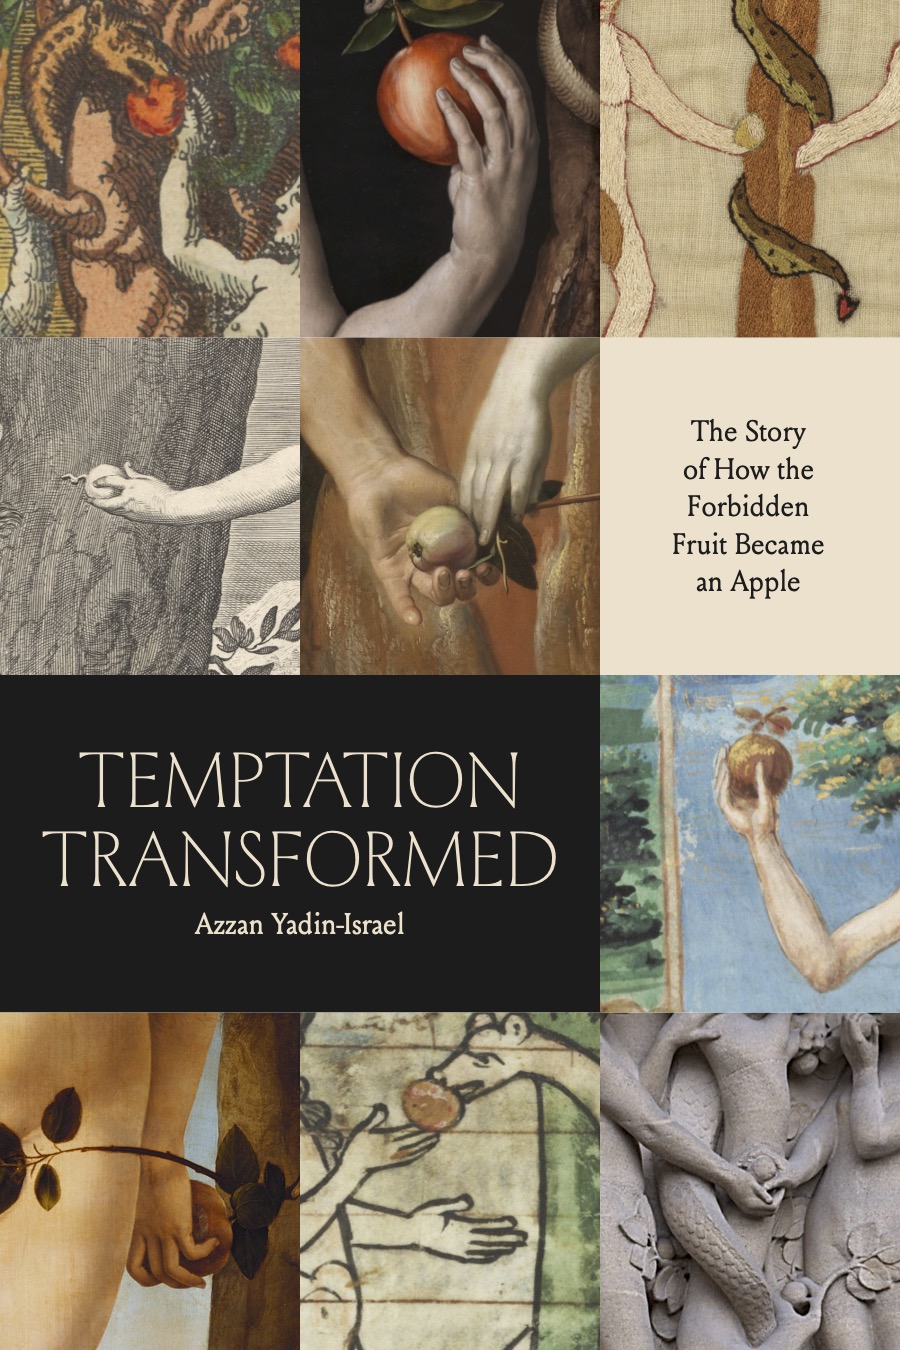 Temptation Transformed The Story of How the Forbidden Fruit Became an Apple, Yadin-Israel